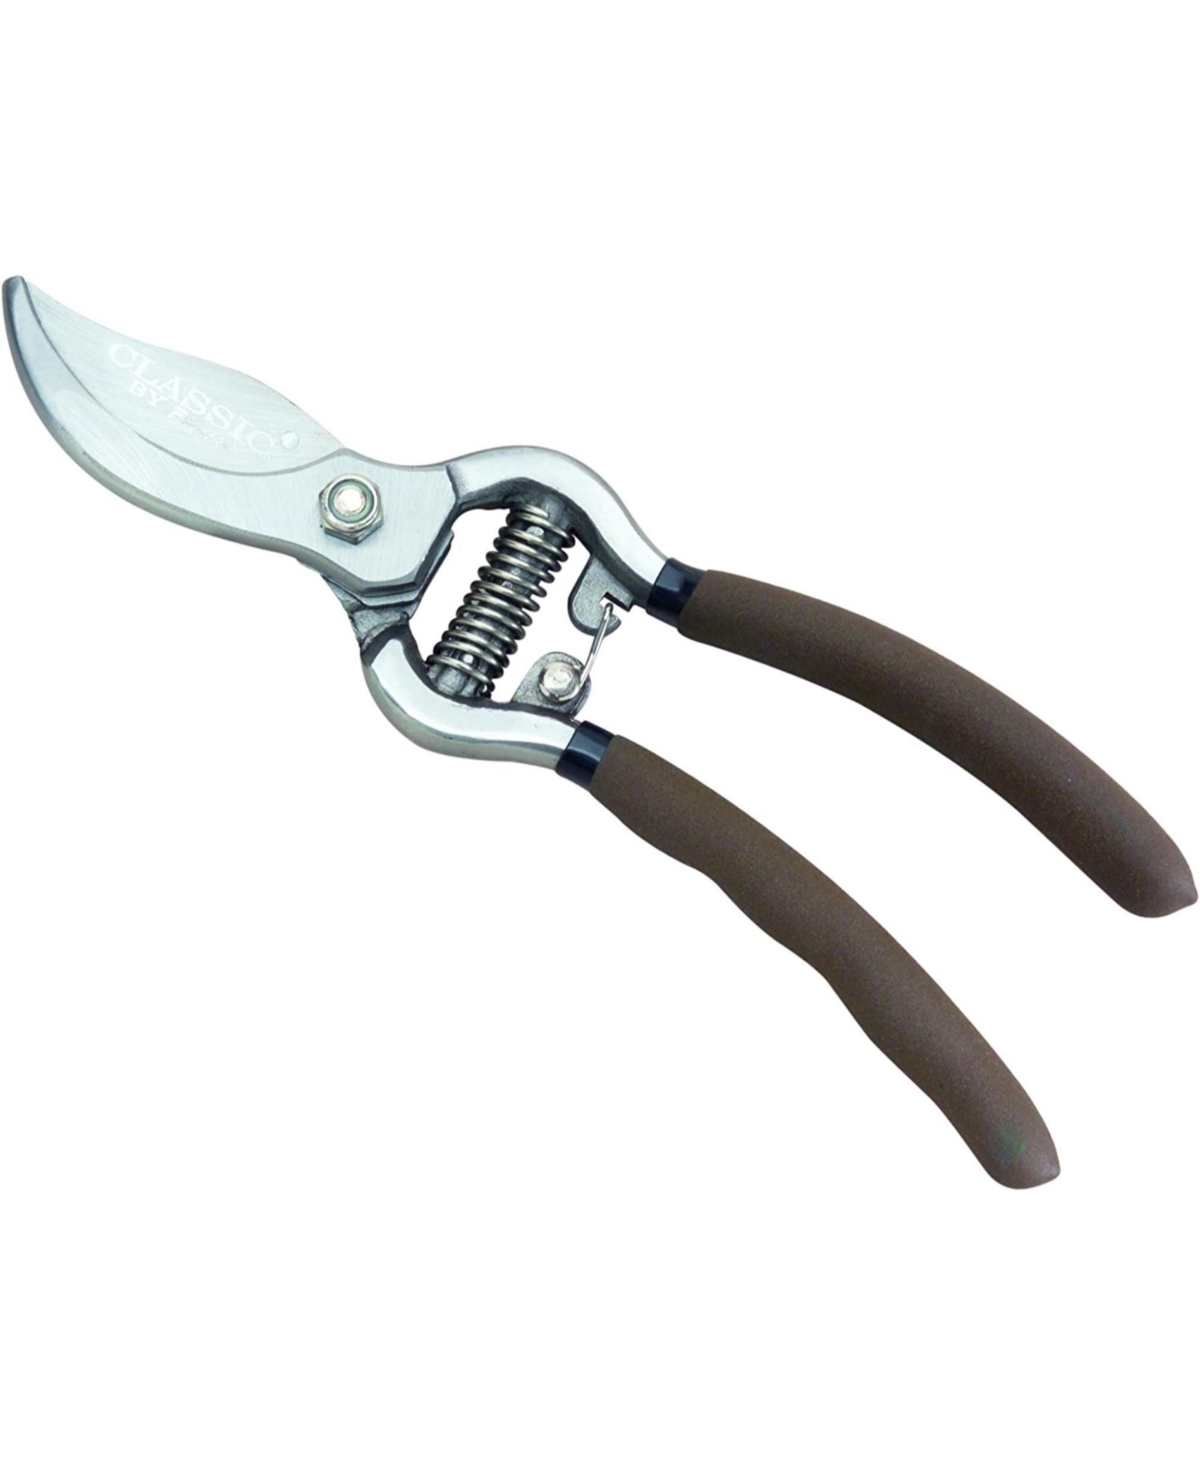 Classic Forged Bypass Pruner Shear, 9 Inches - Multi